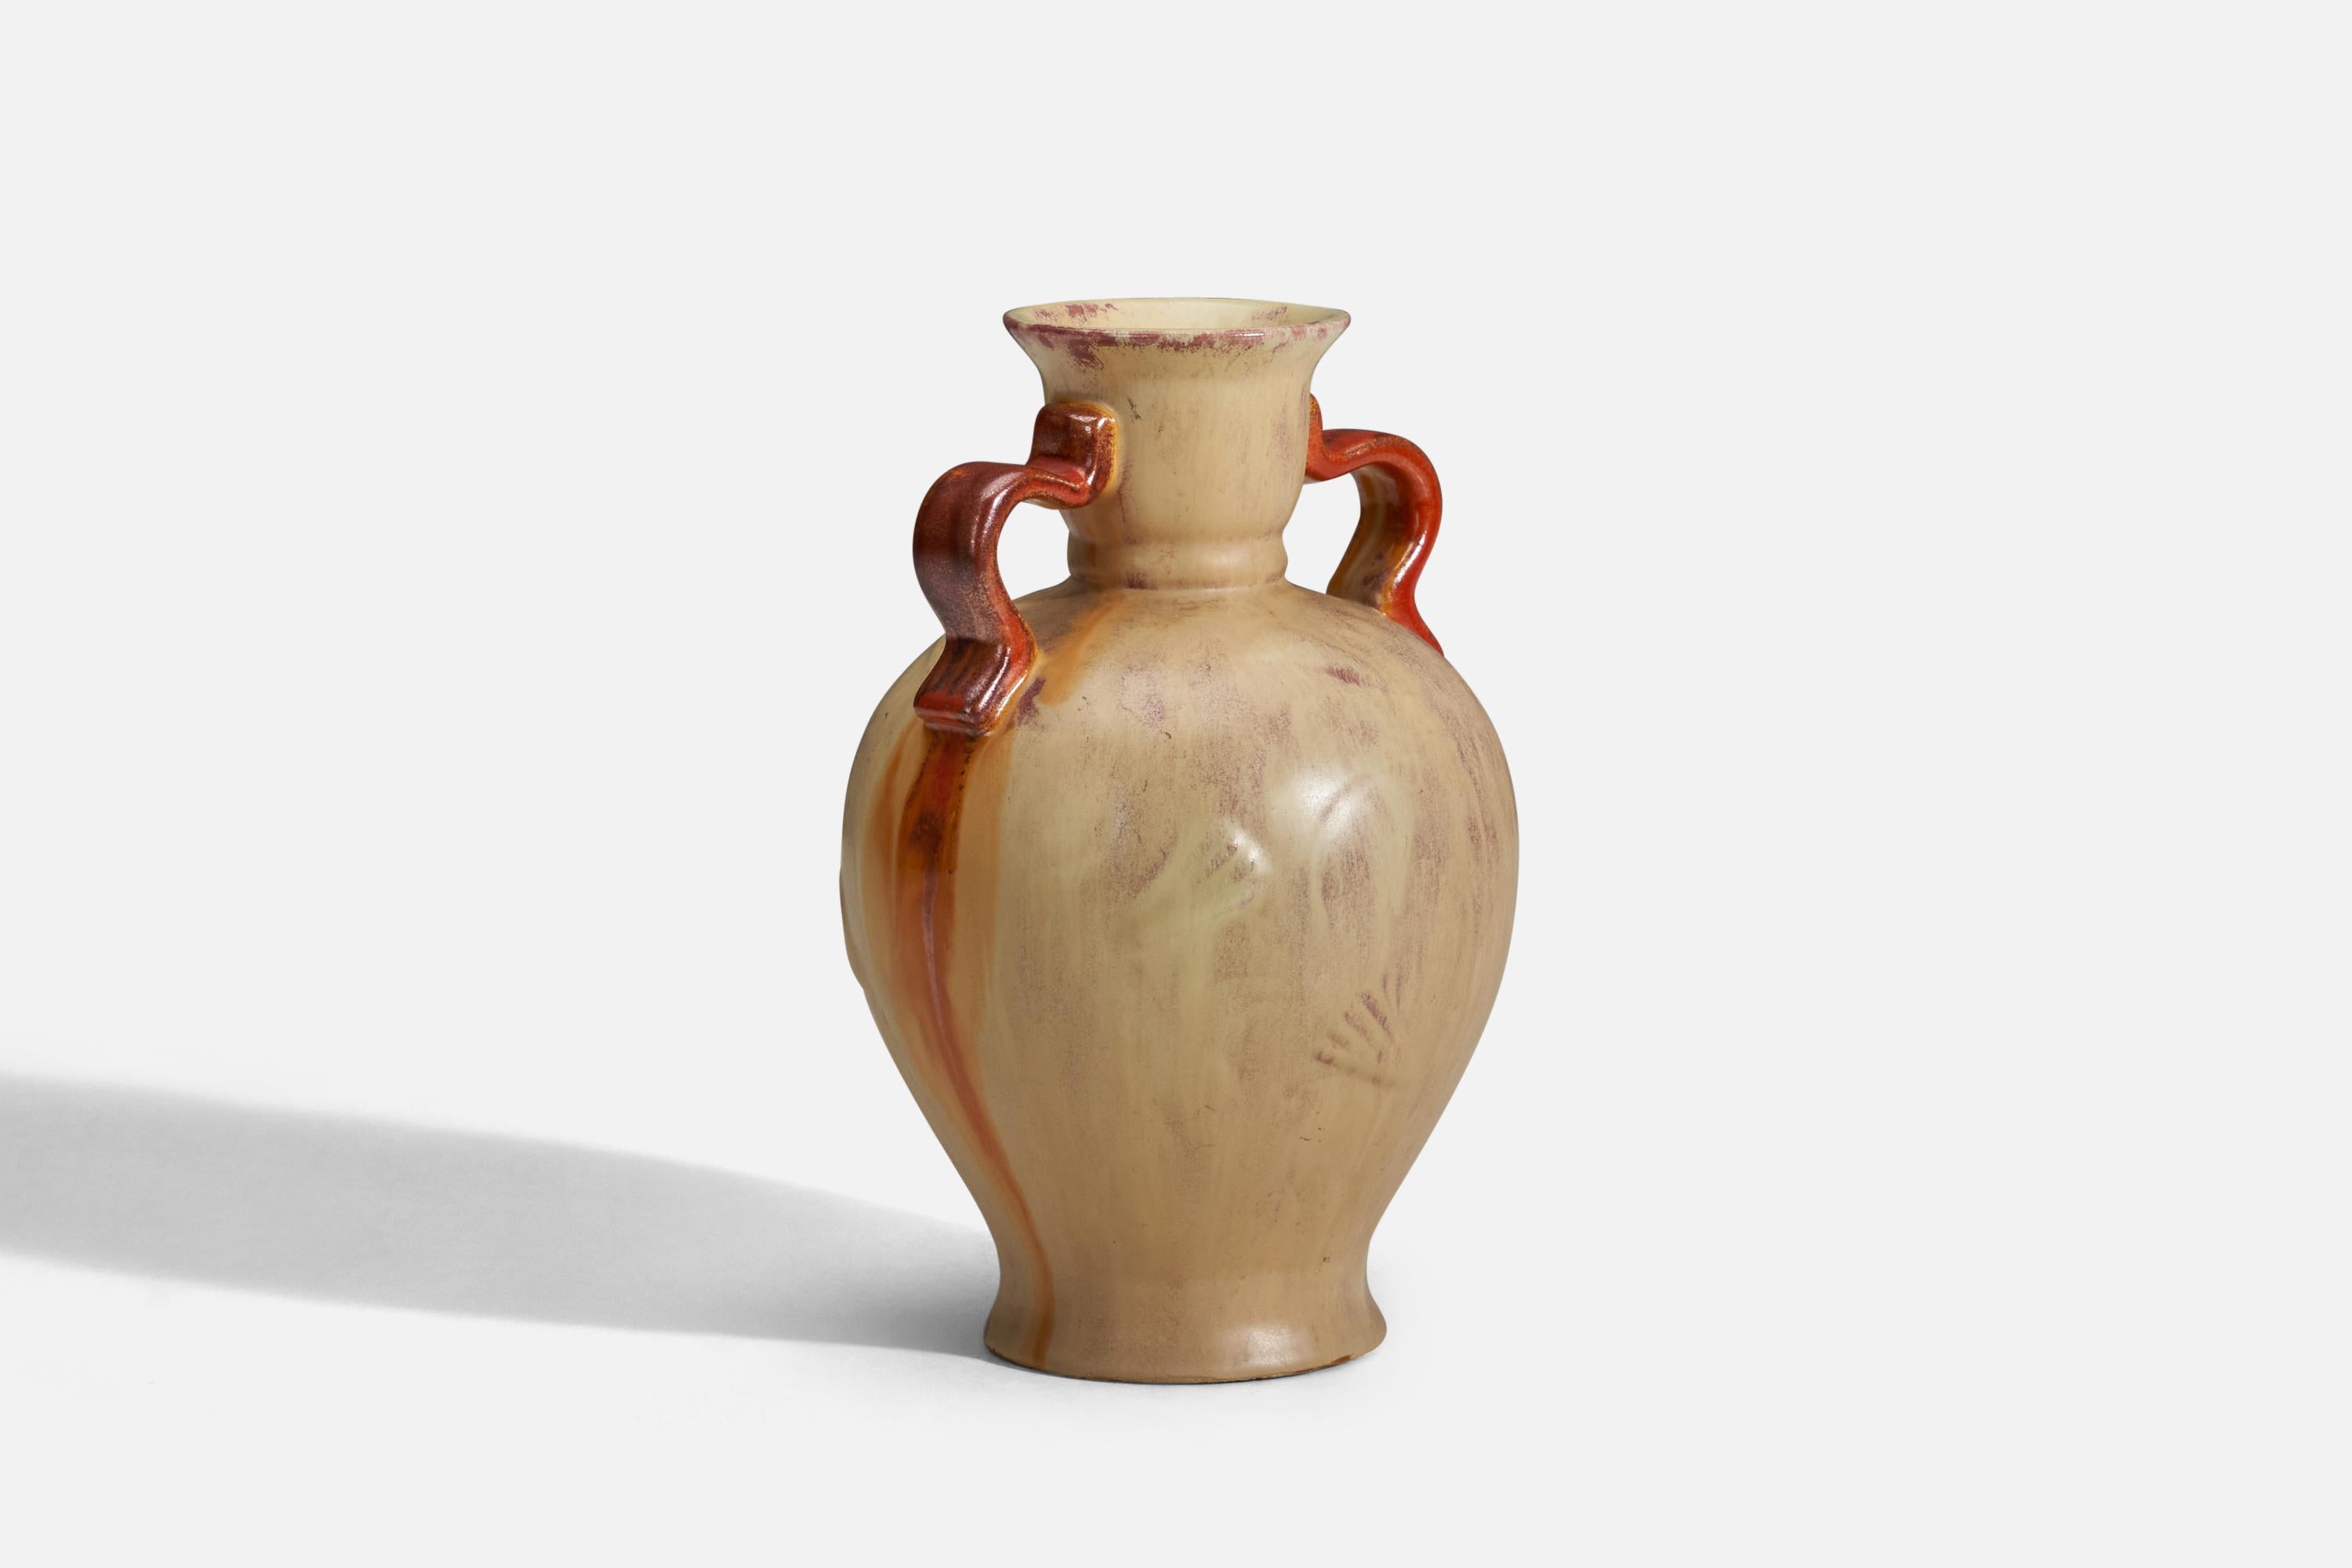 A cream and red glazed earthenware vase designed and produced by Upsala-Ekeby, Sweden, 1940s.